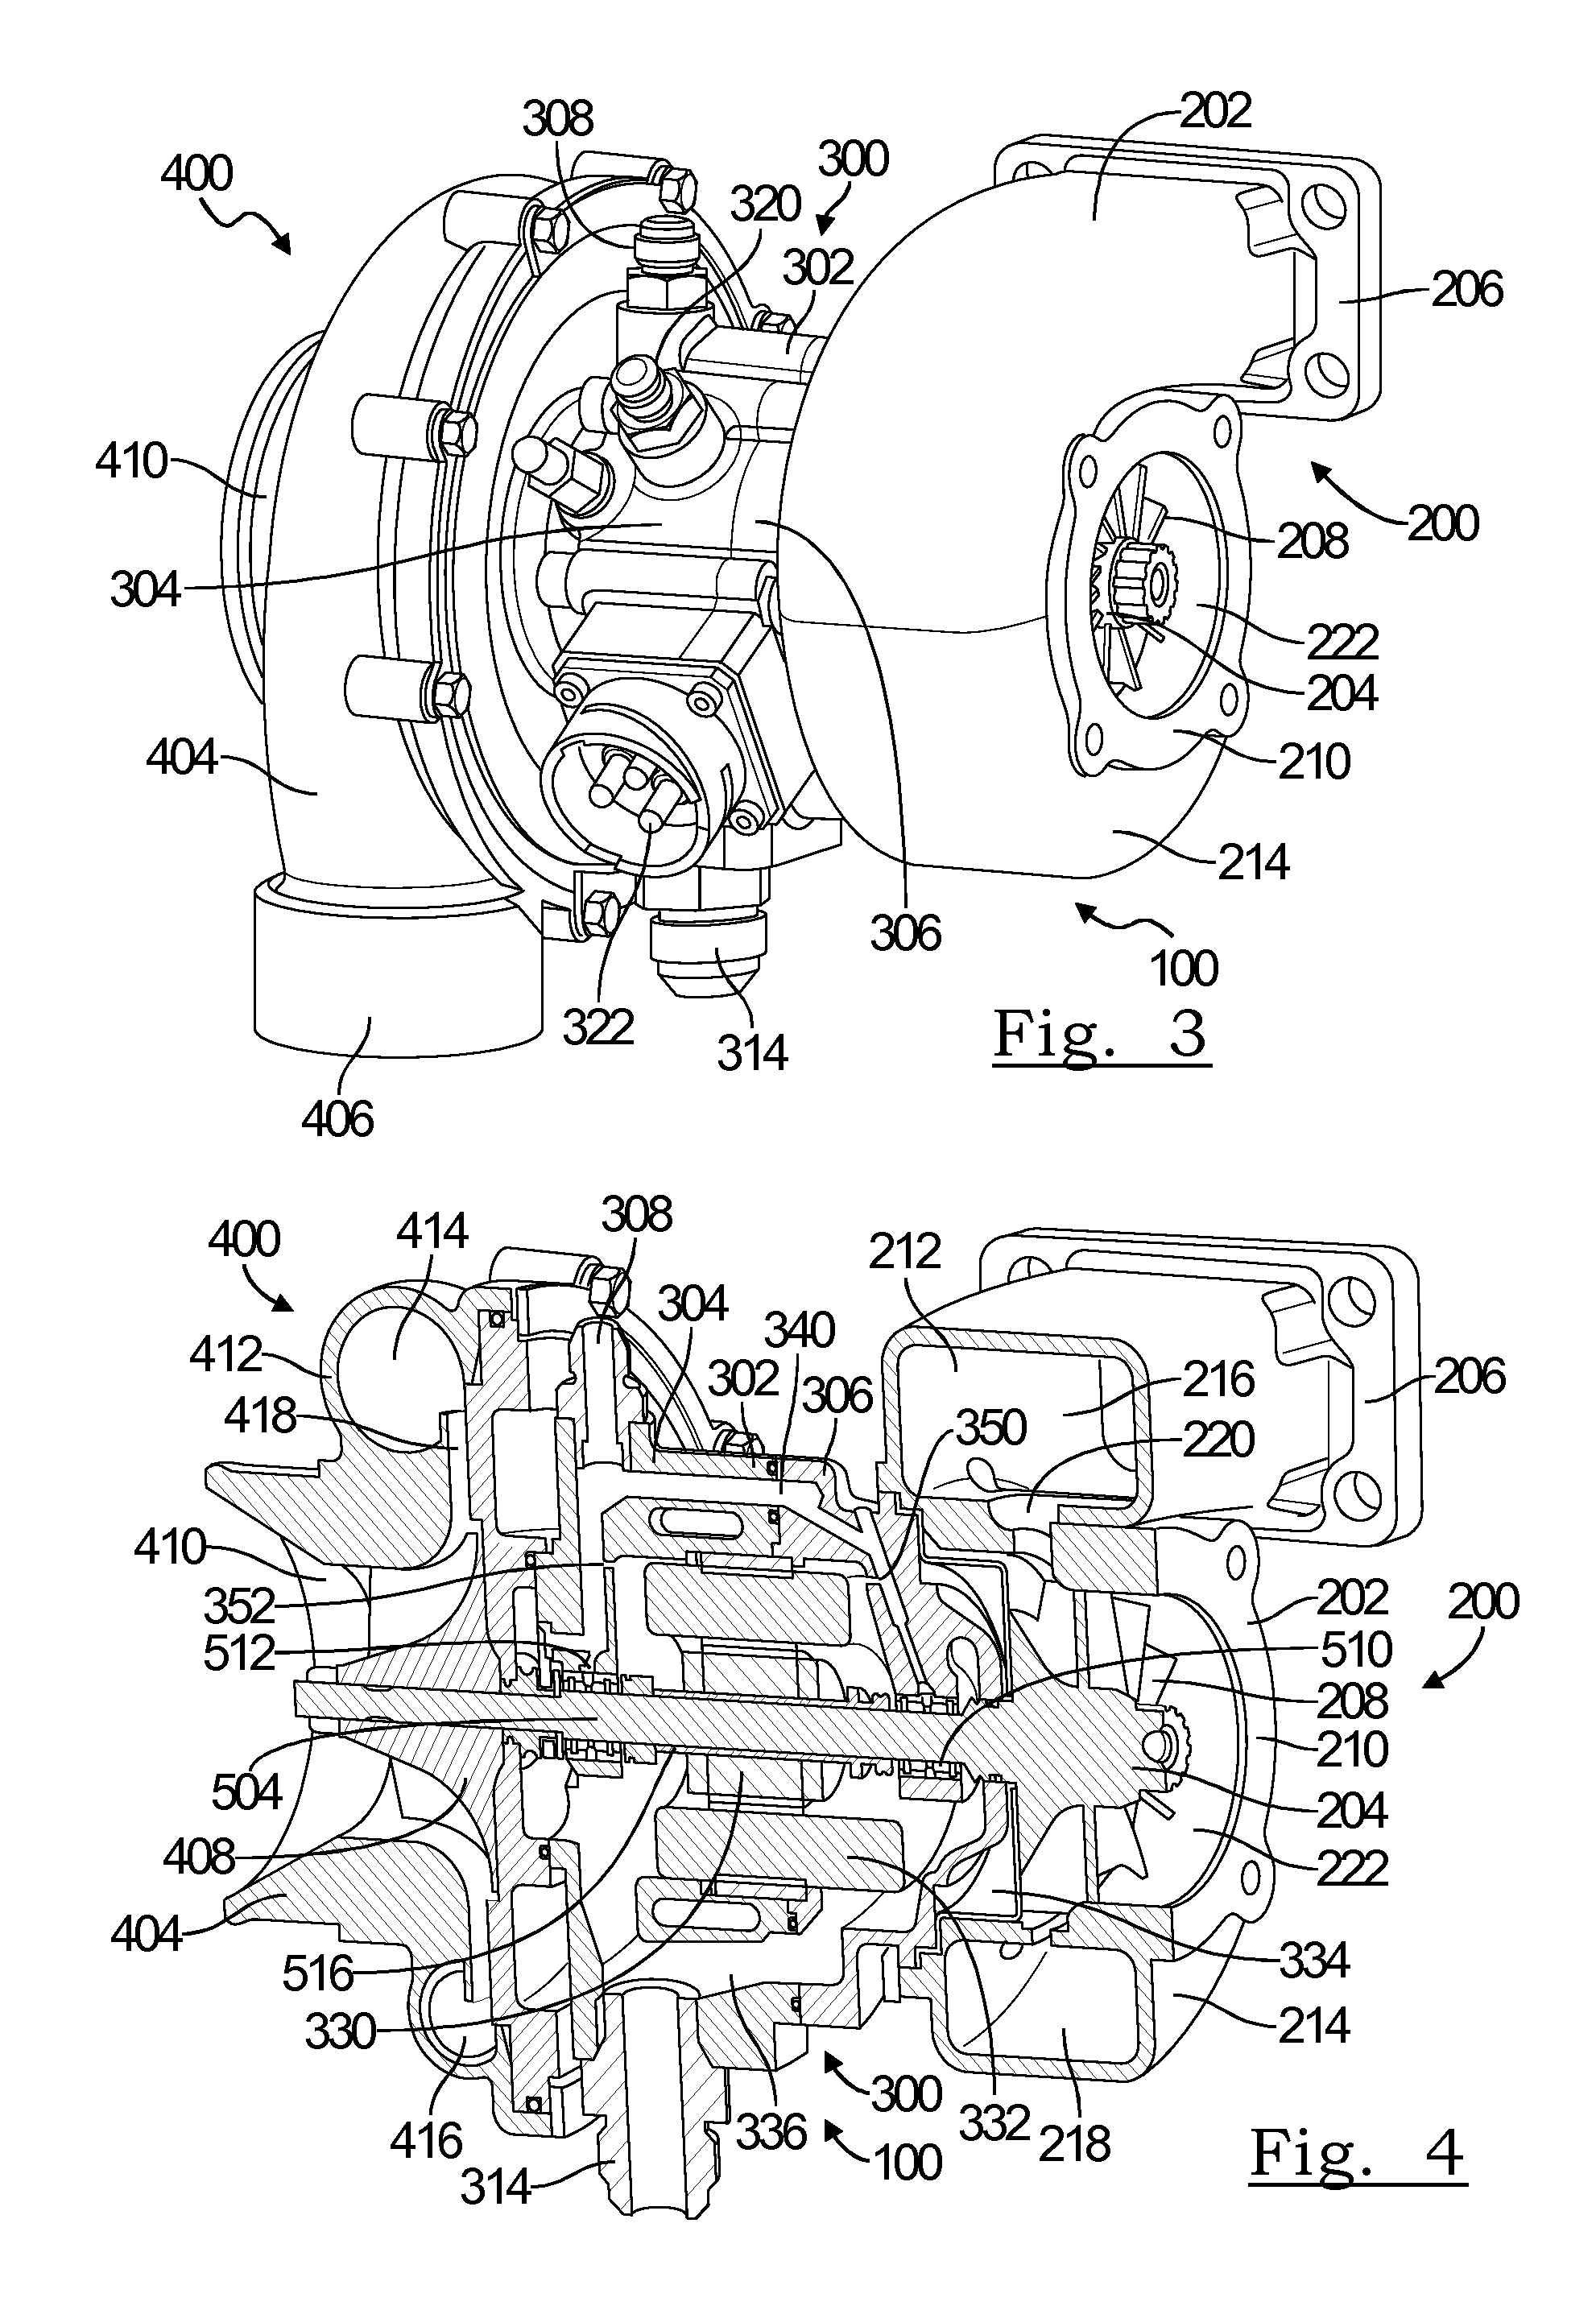 Cooling an electrically controlled turbocharger